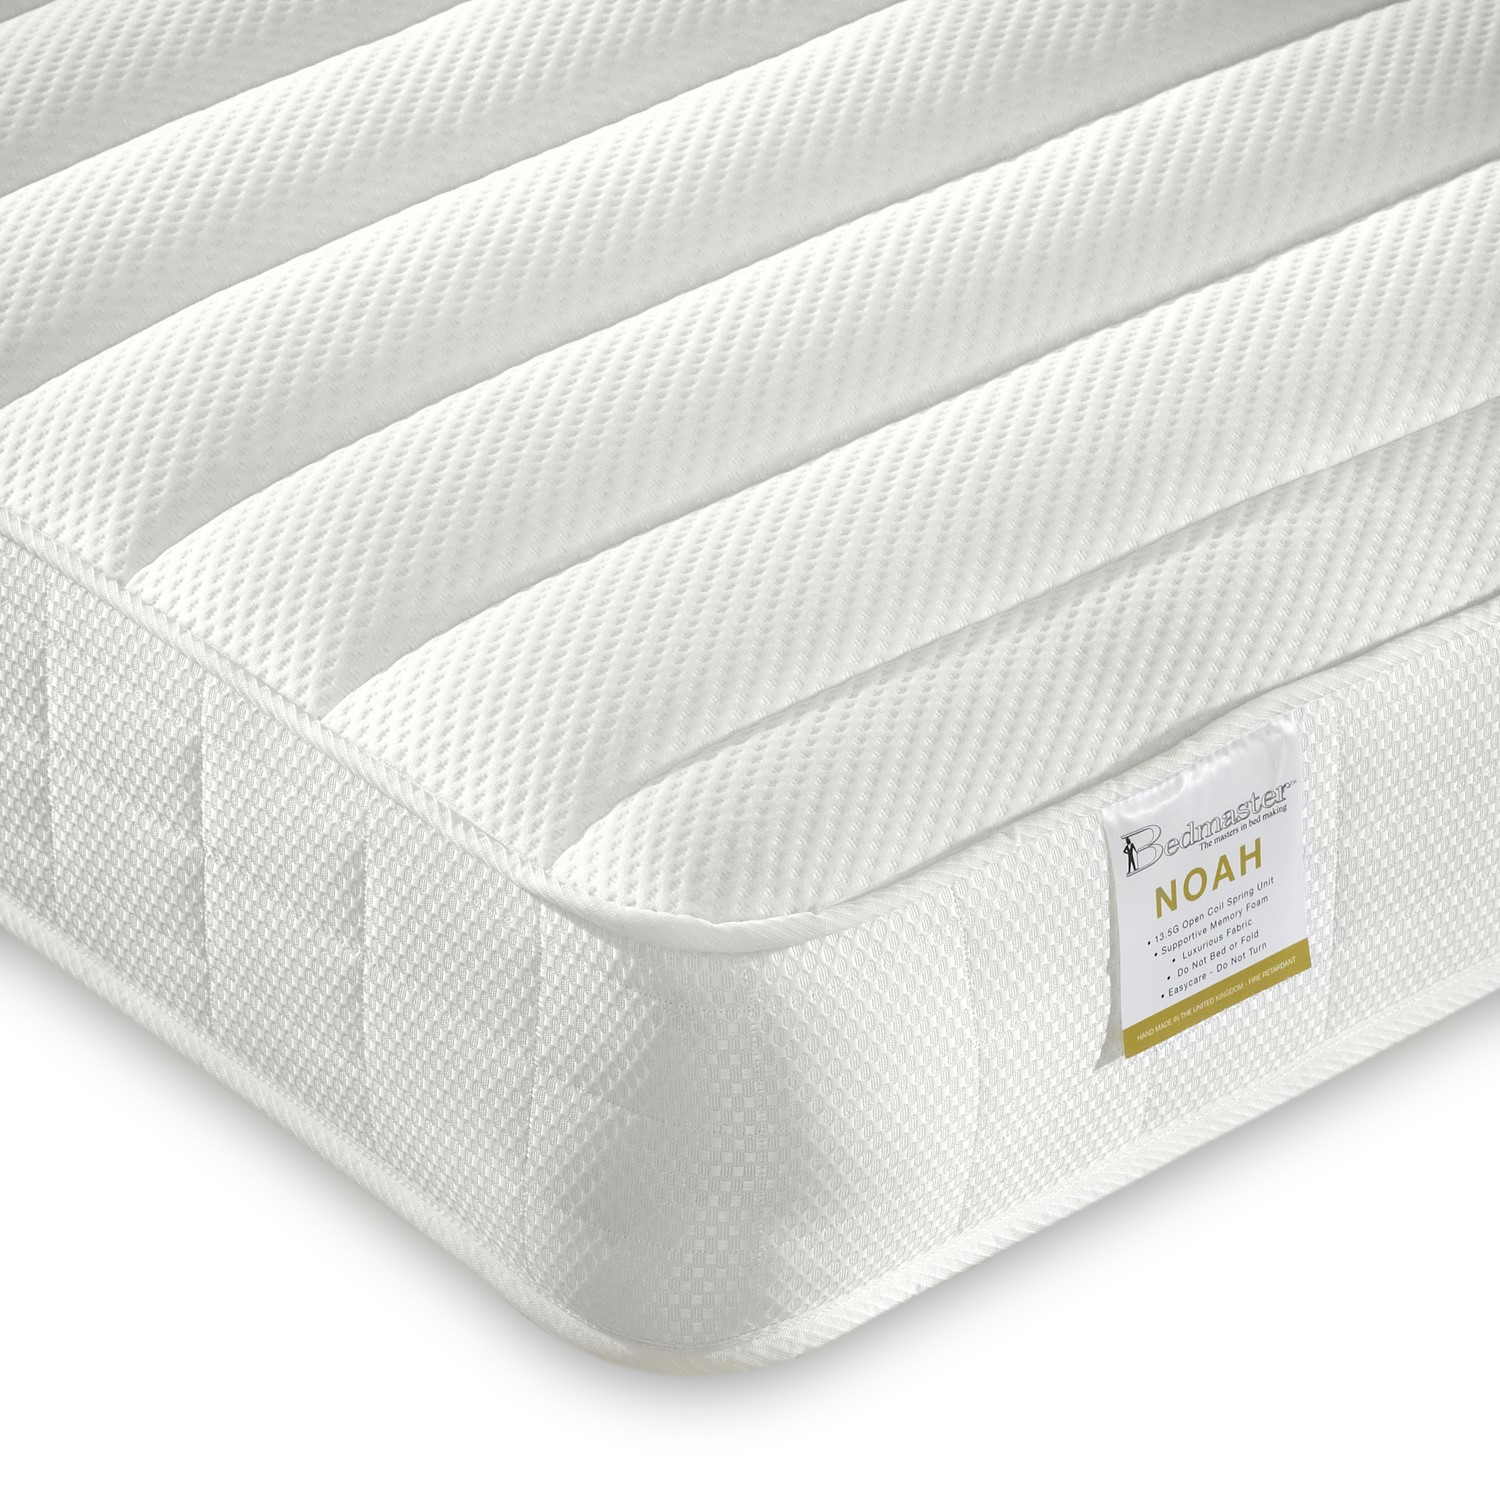 Noah Hybrid Memory Foam and Coil Spring Quilted Mattress - Single NOAH2 5056096024333.0